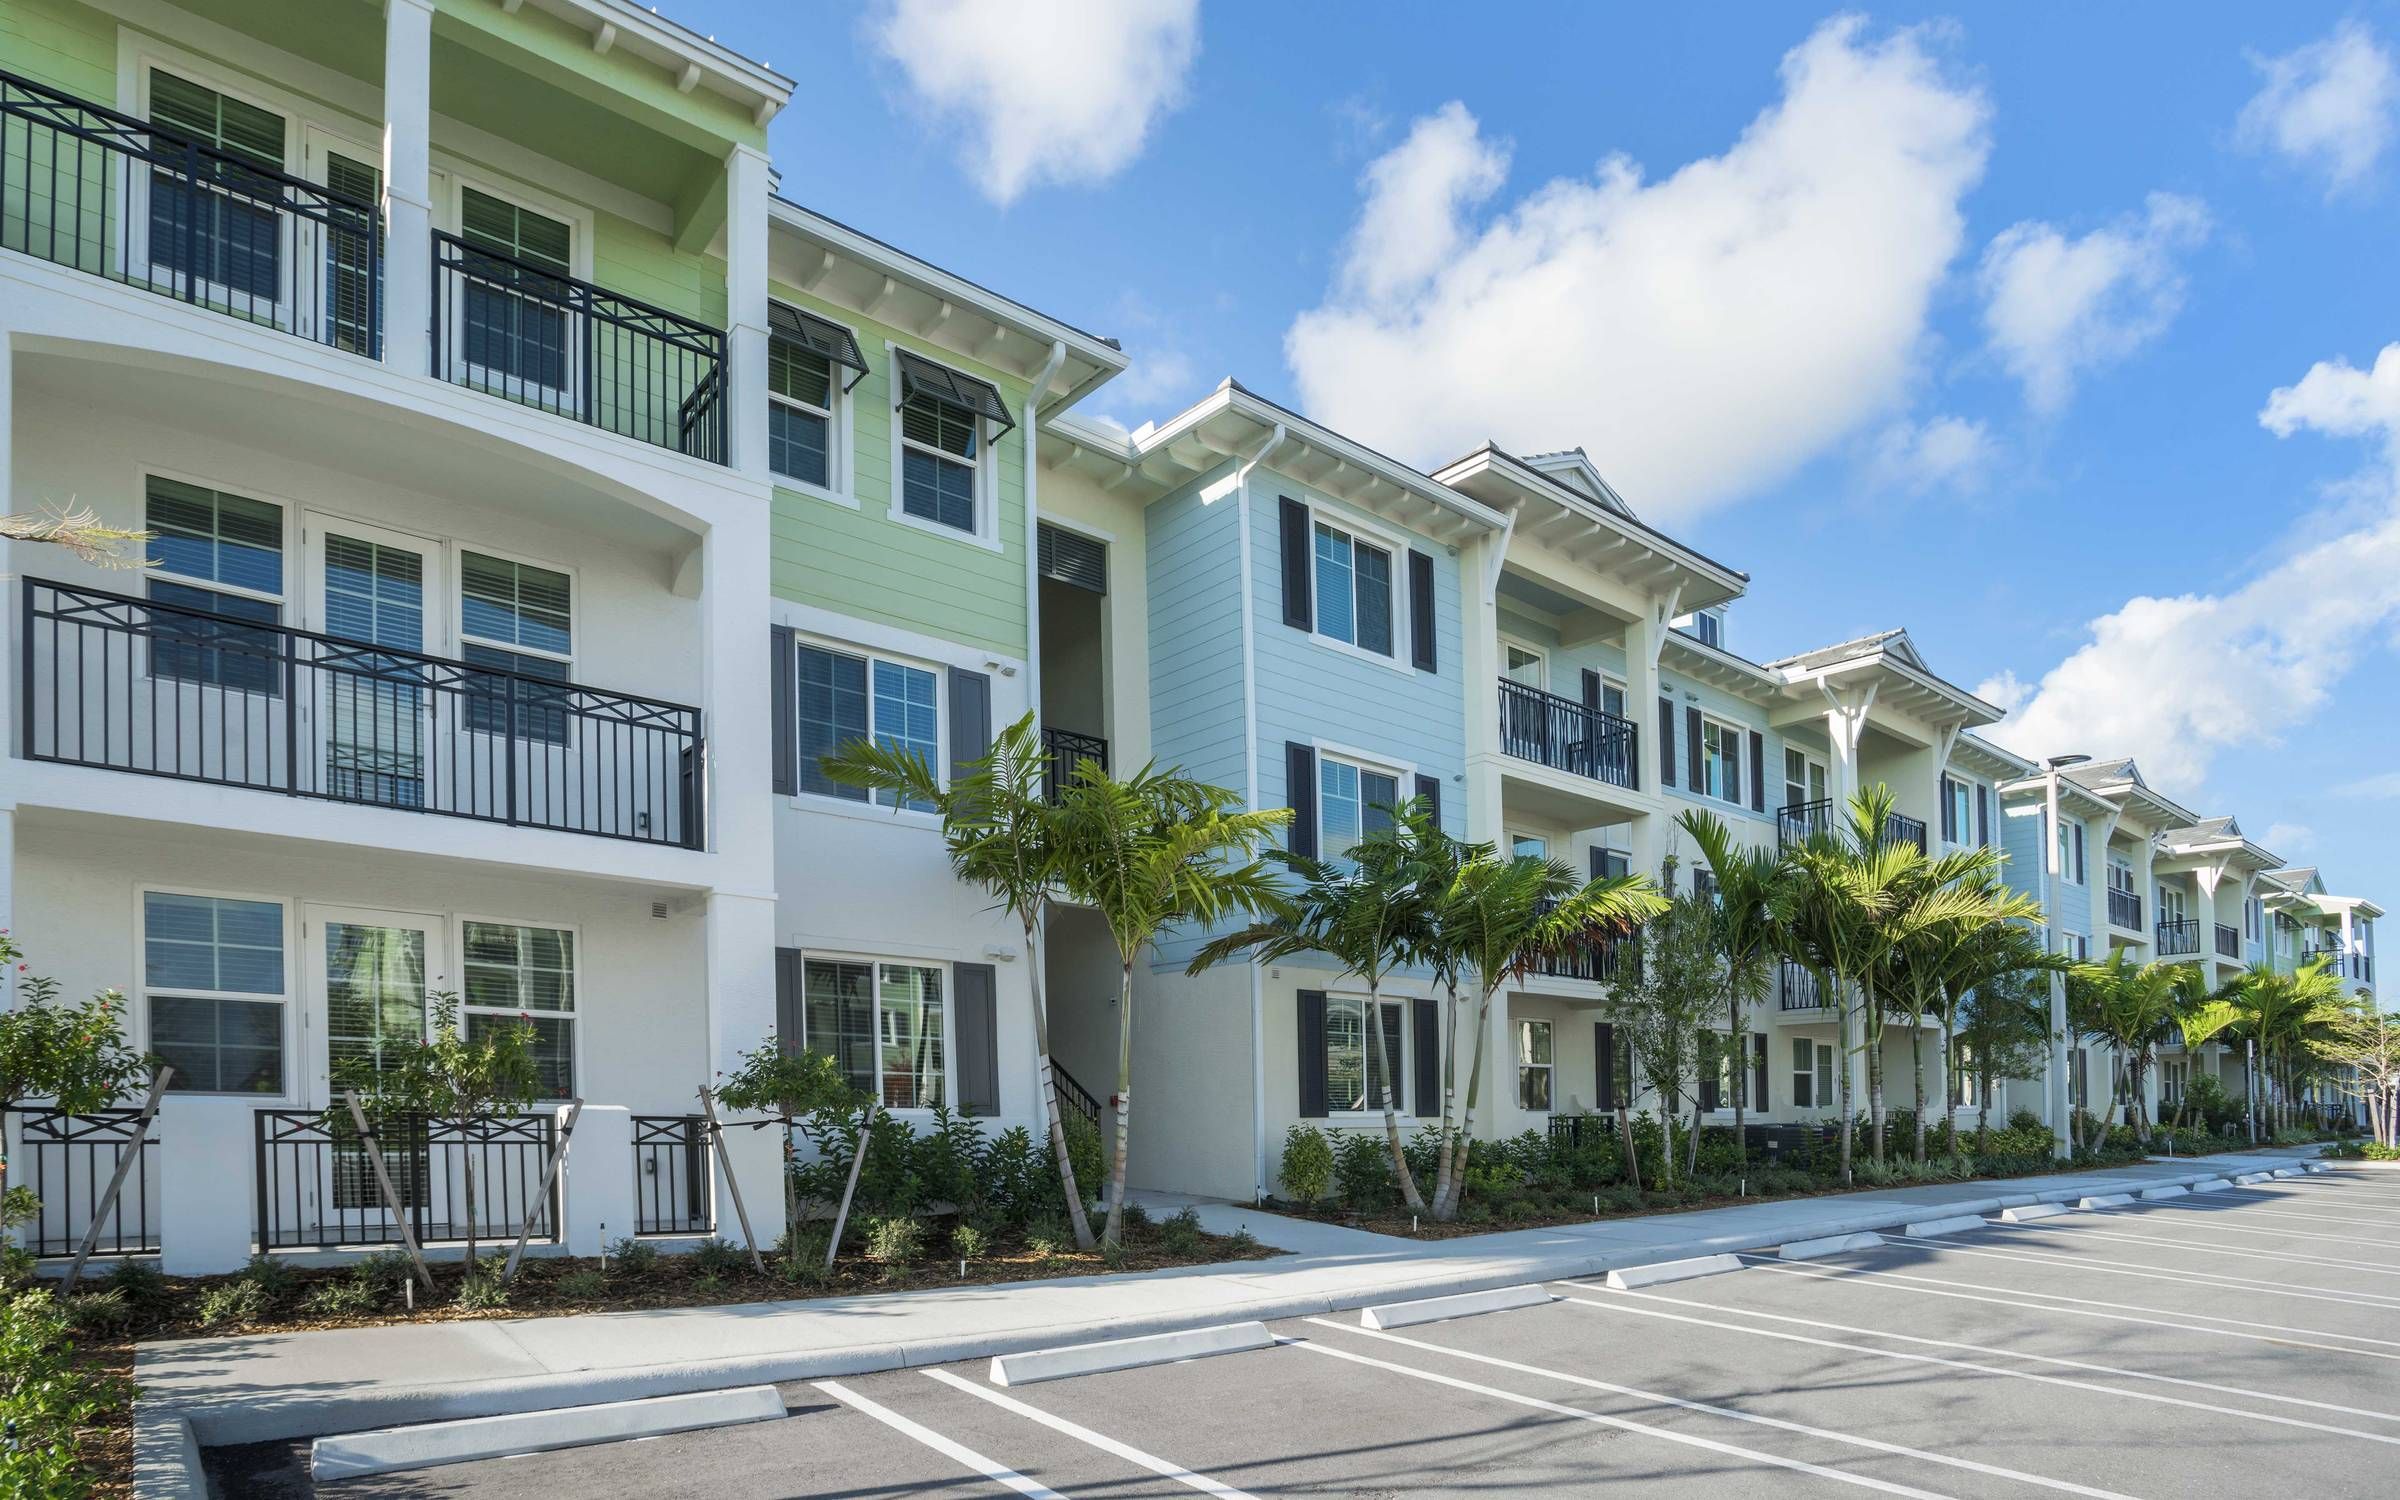 Delray Station apartment complex exterior with pastel-colored paint and beachy architecture.